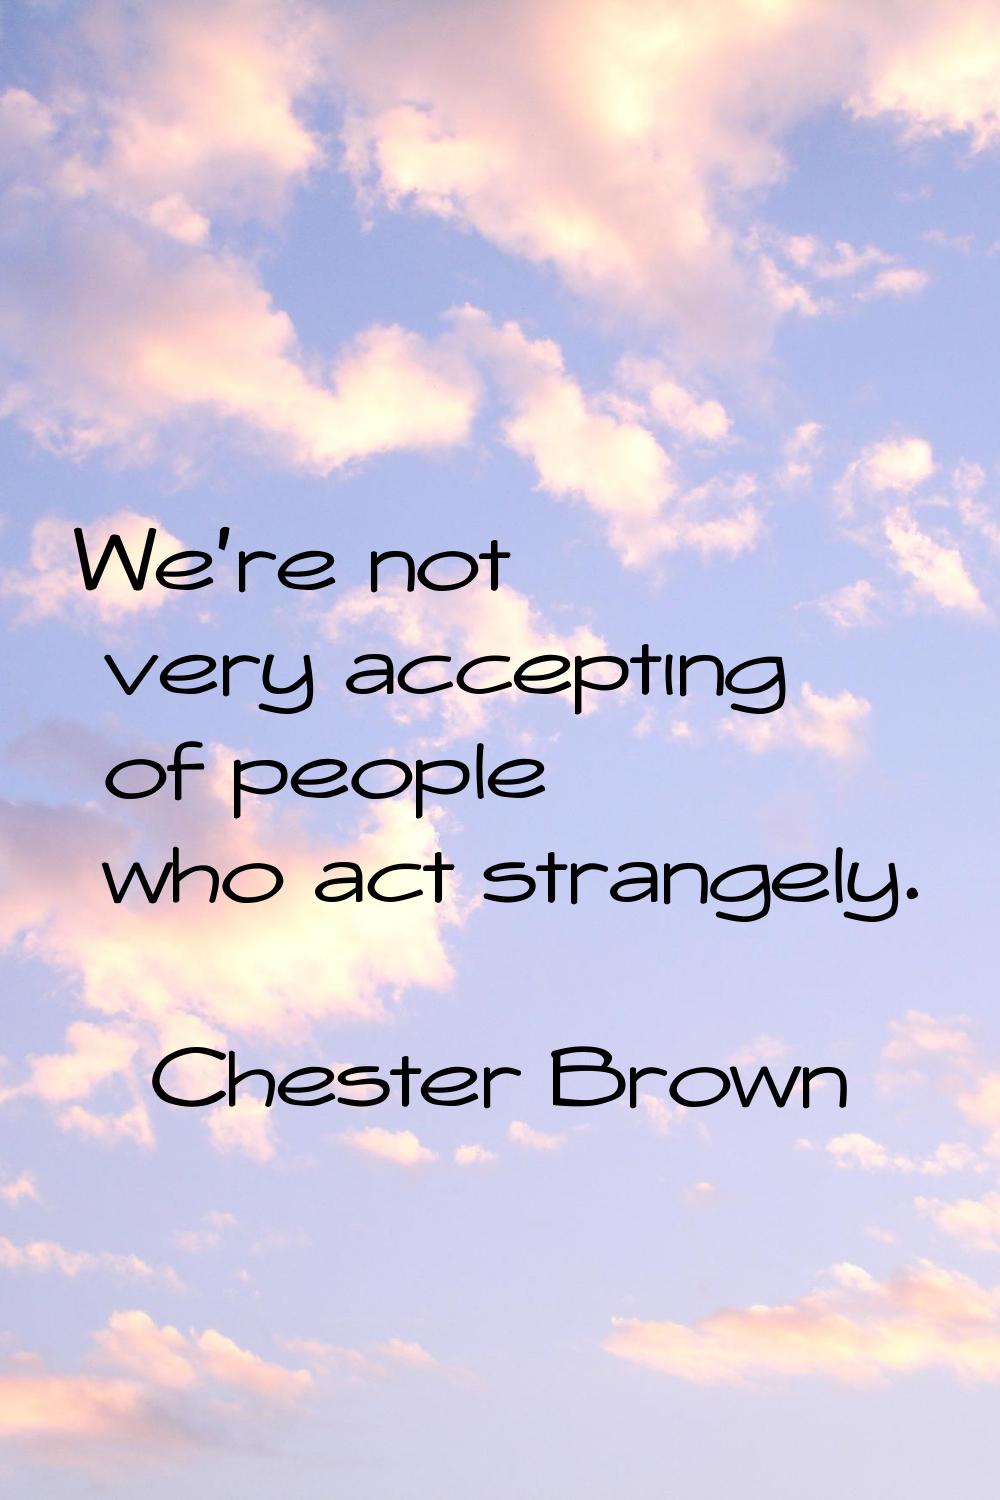 We're not very accepting of people who act strangely.